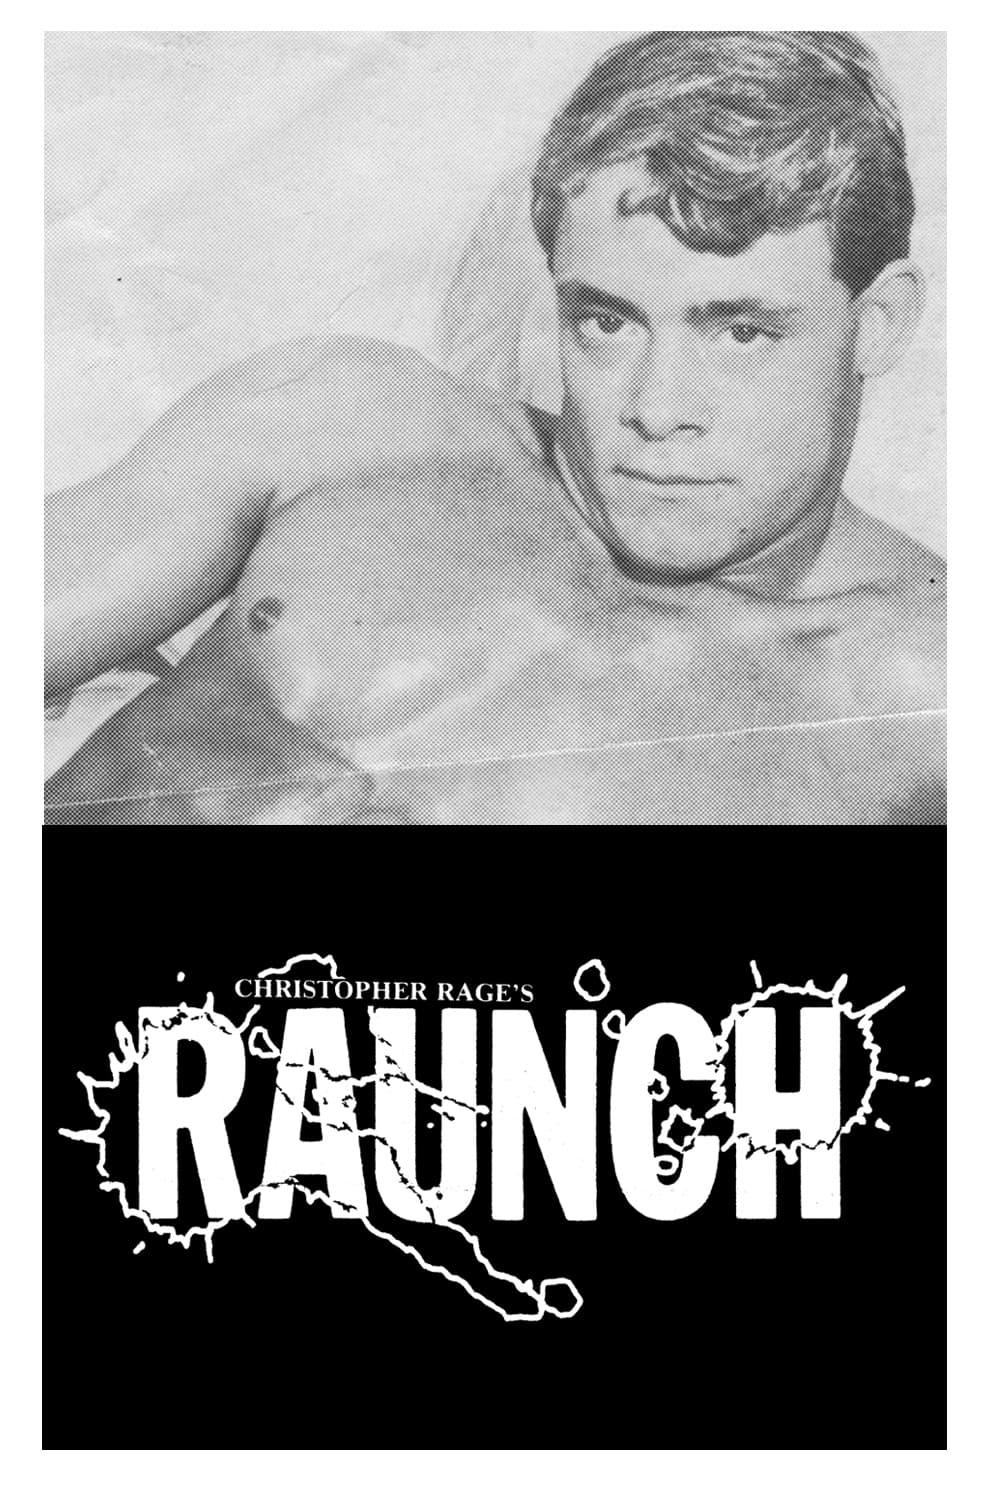 Raunch poster